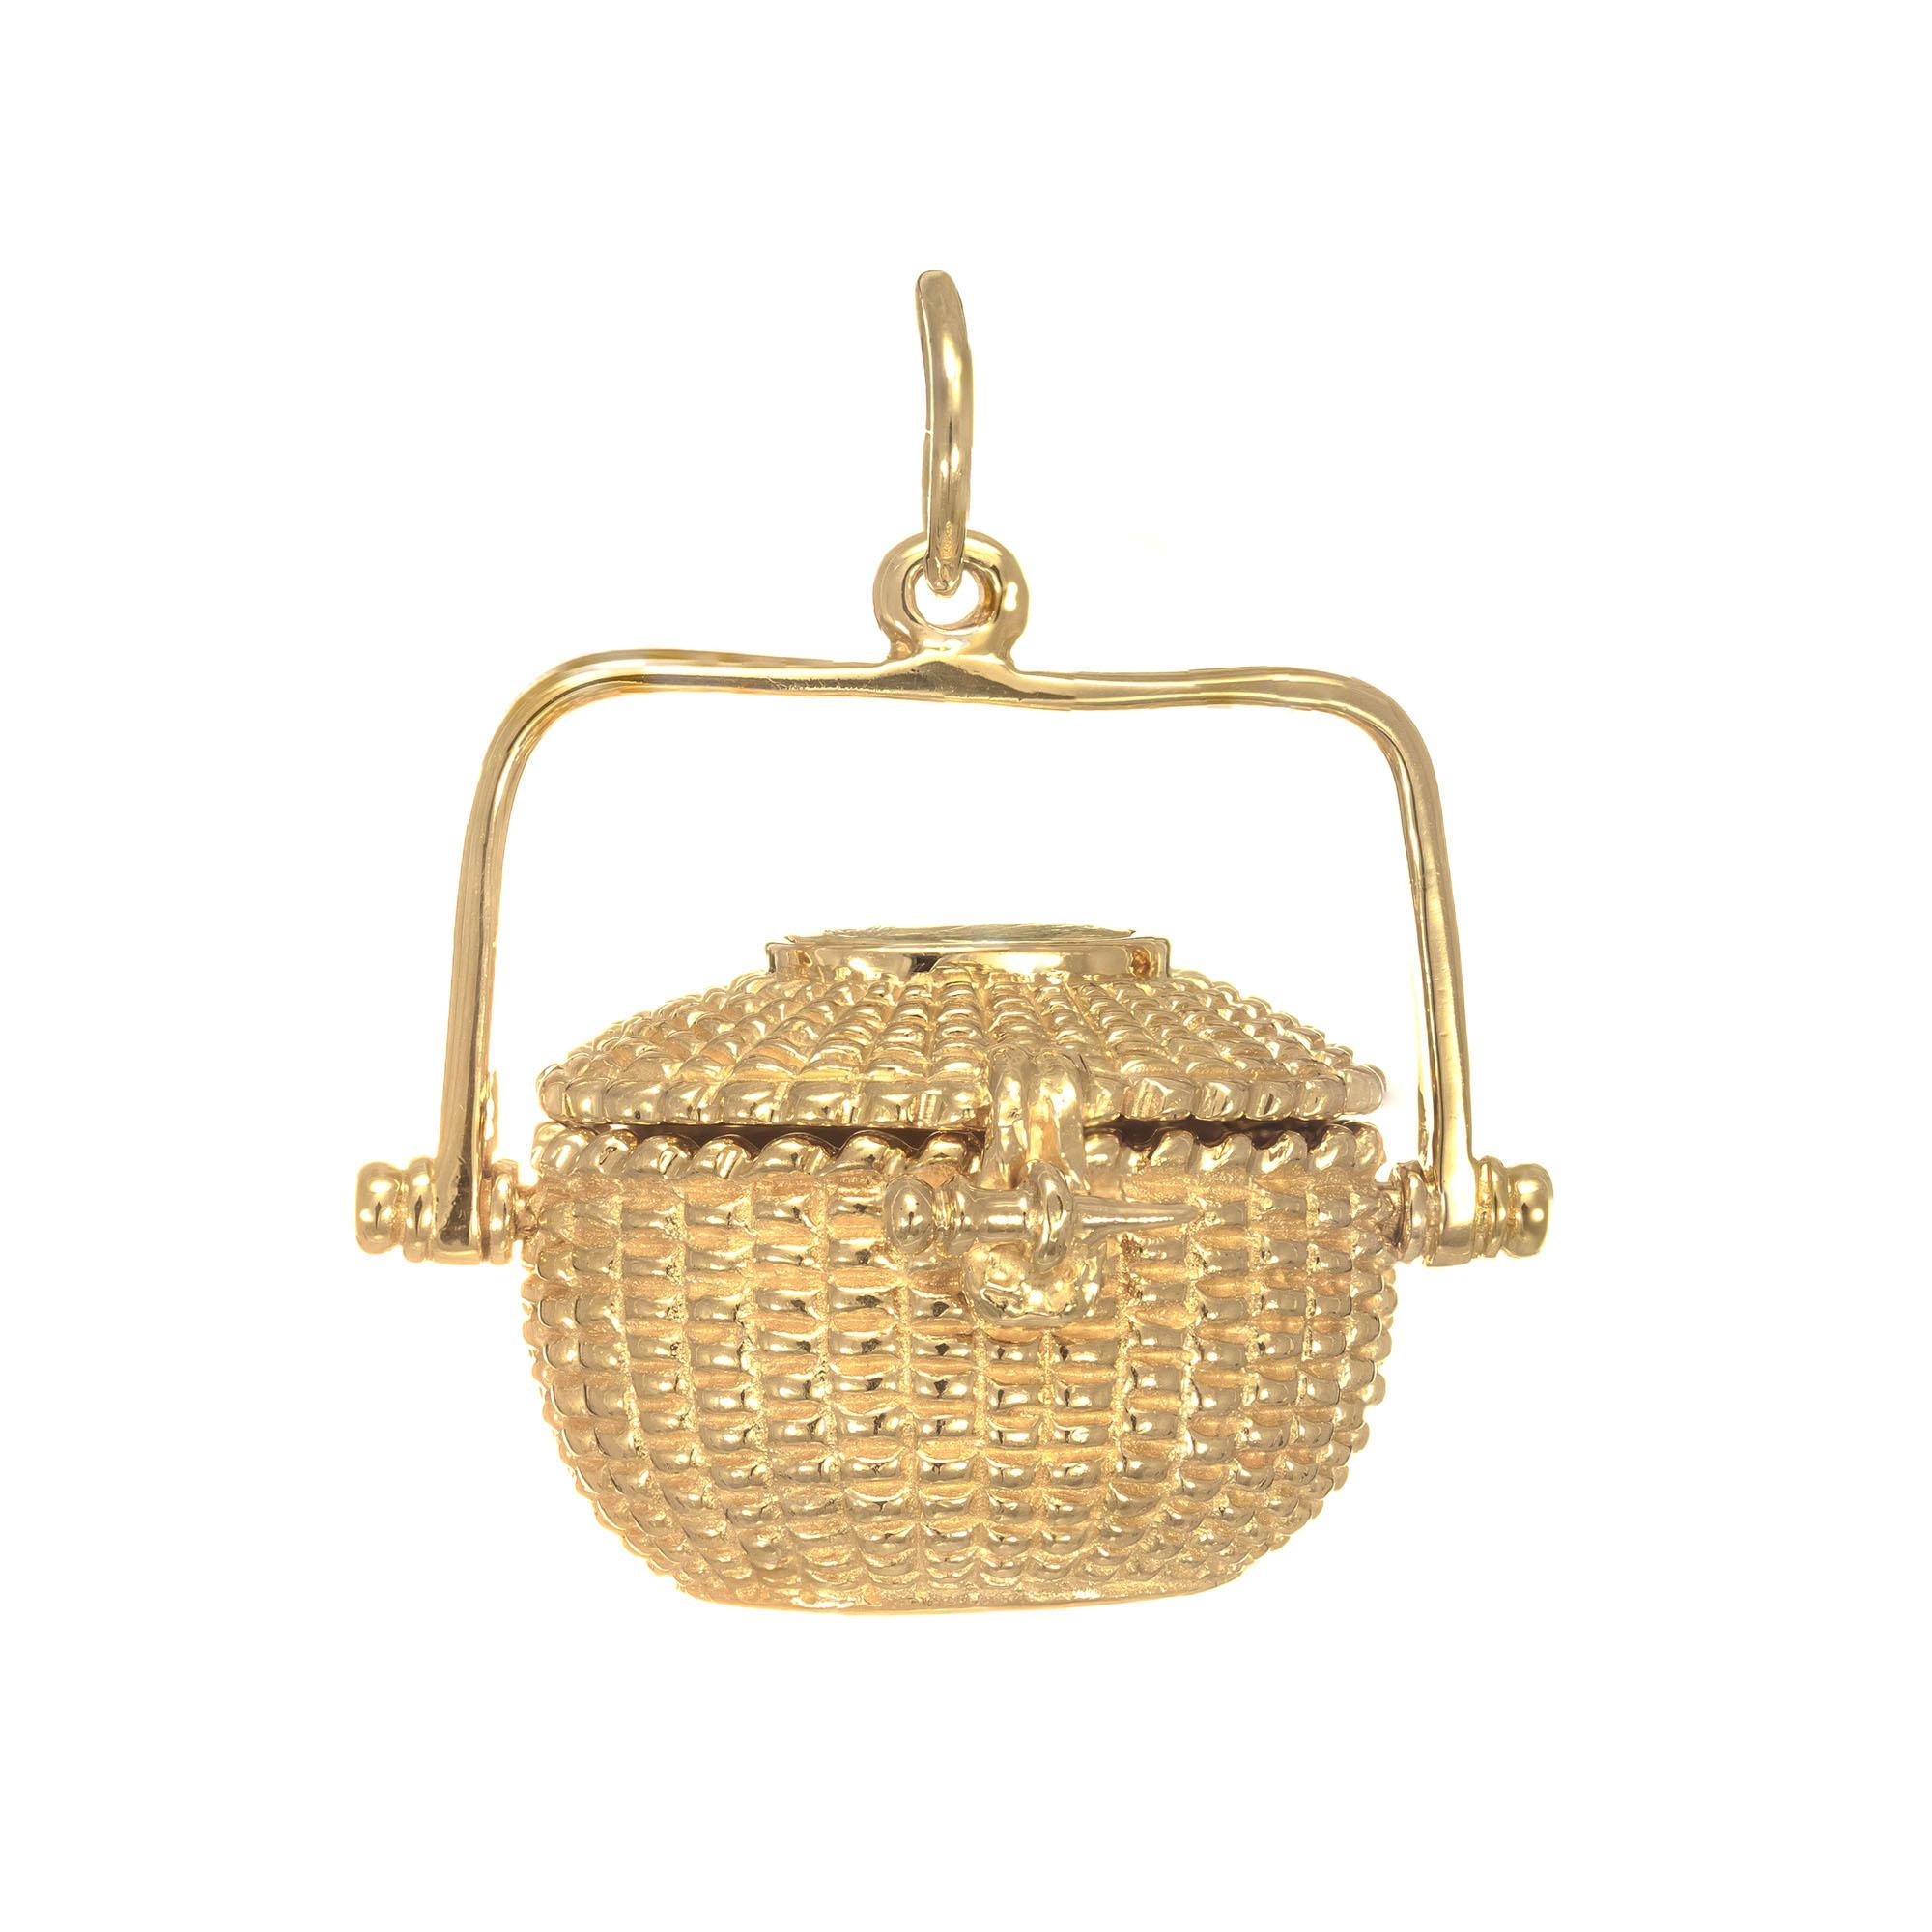 Glenaan signed 14k yellow gold Nantucket basket pendant.

14k yellow gold 
Stamped: 14k
20.7 grams
Top to bottom: 29mm or 1 Inch
Width: 32.5mm or 1.25 Inch


